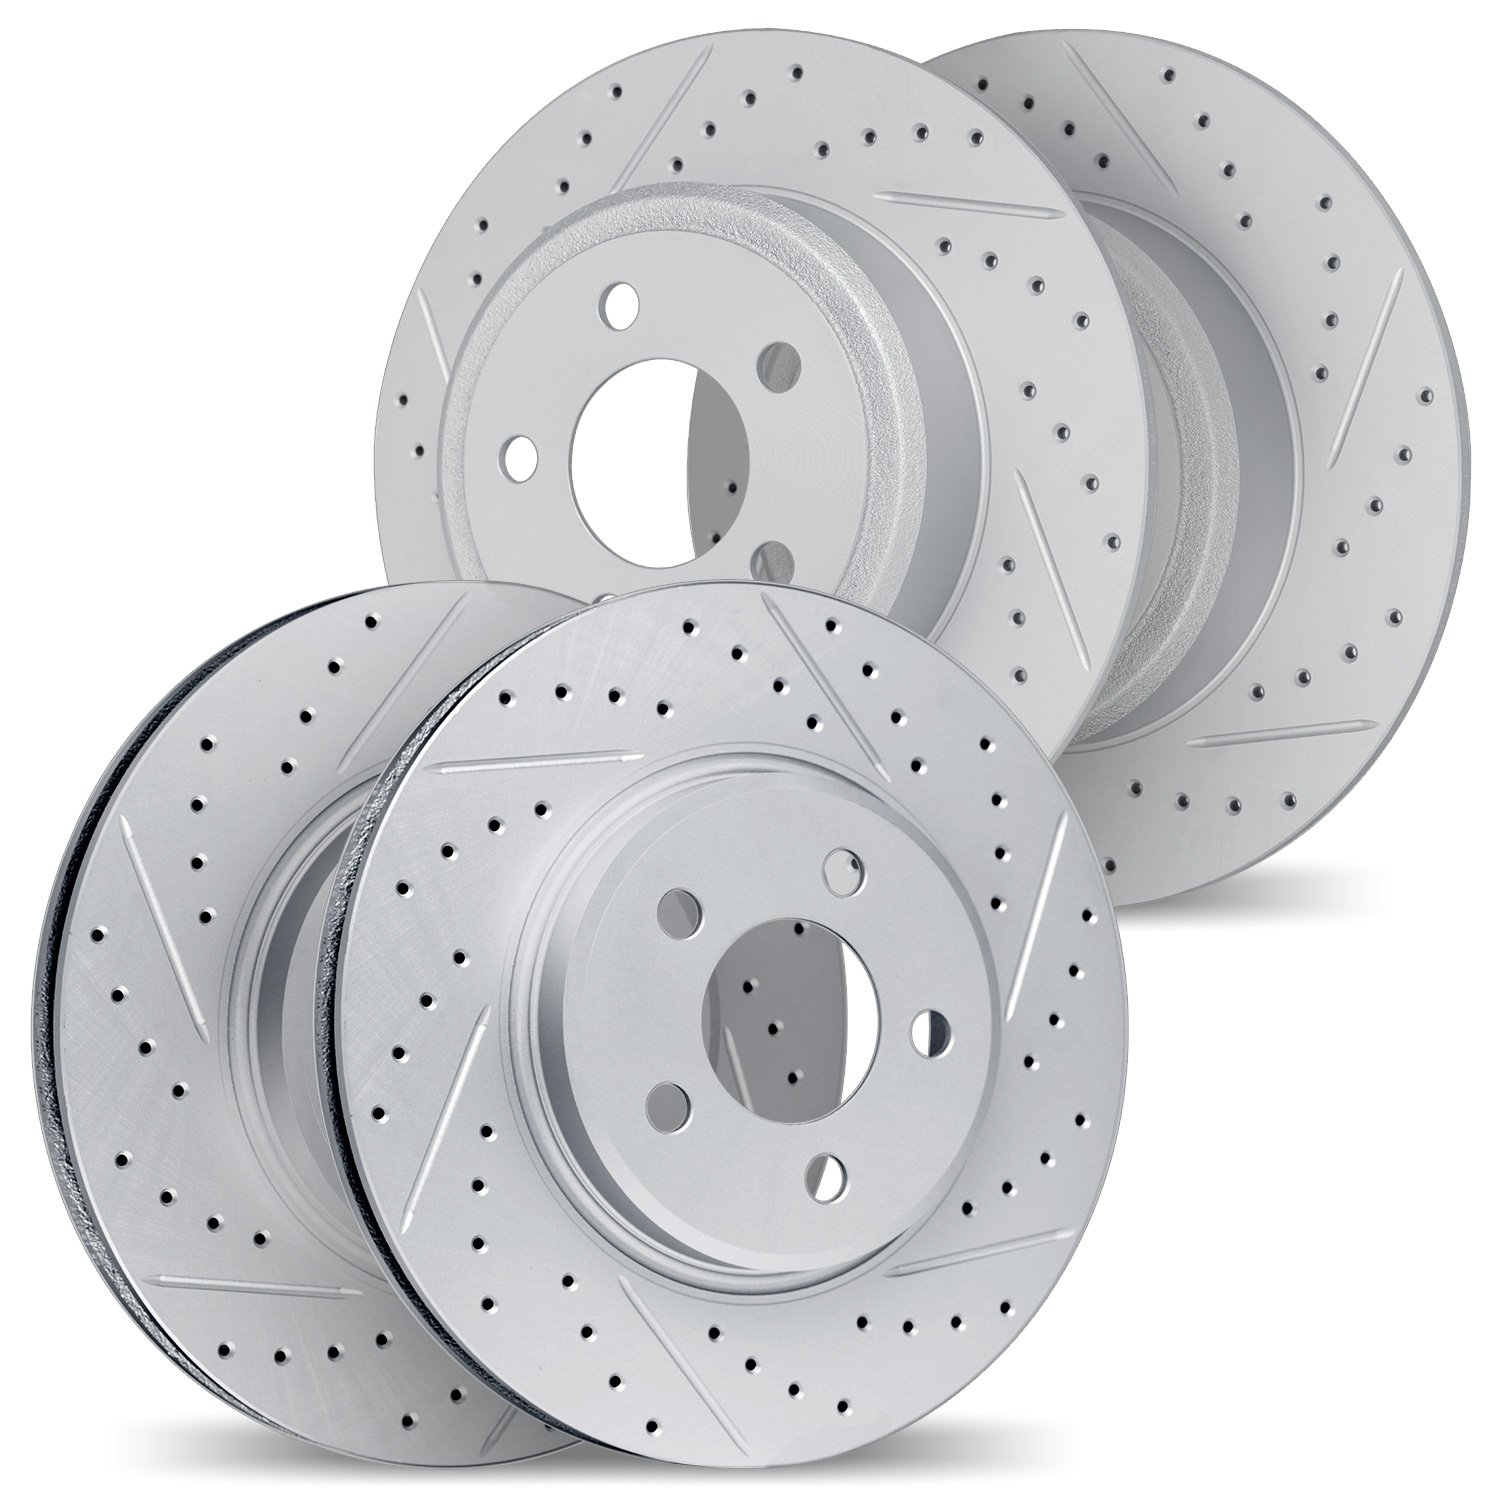 2004-59024 Geoperformance Drilled/Slotted Brake Rotors, 2008-2012 Acura/Honda, Position: Front and Rear